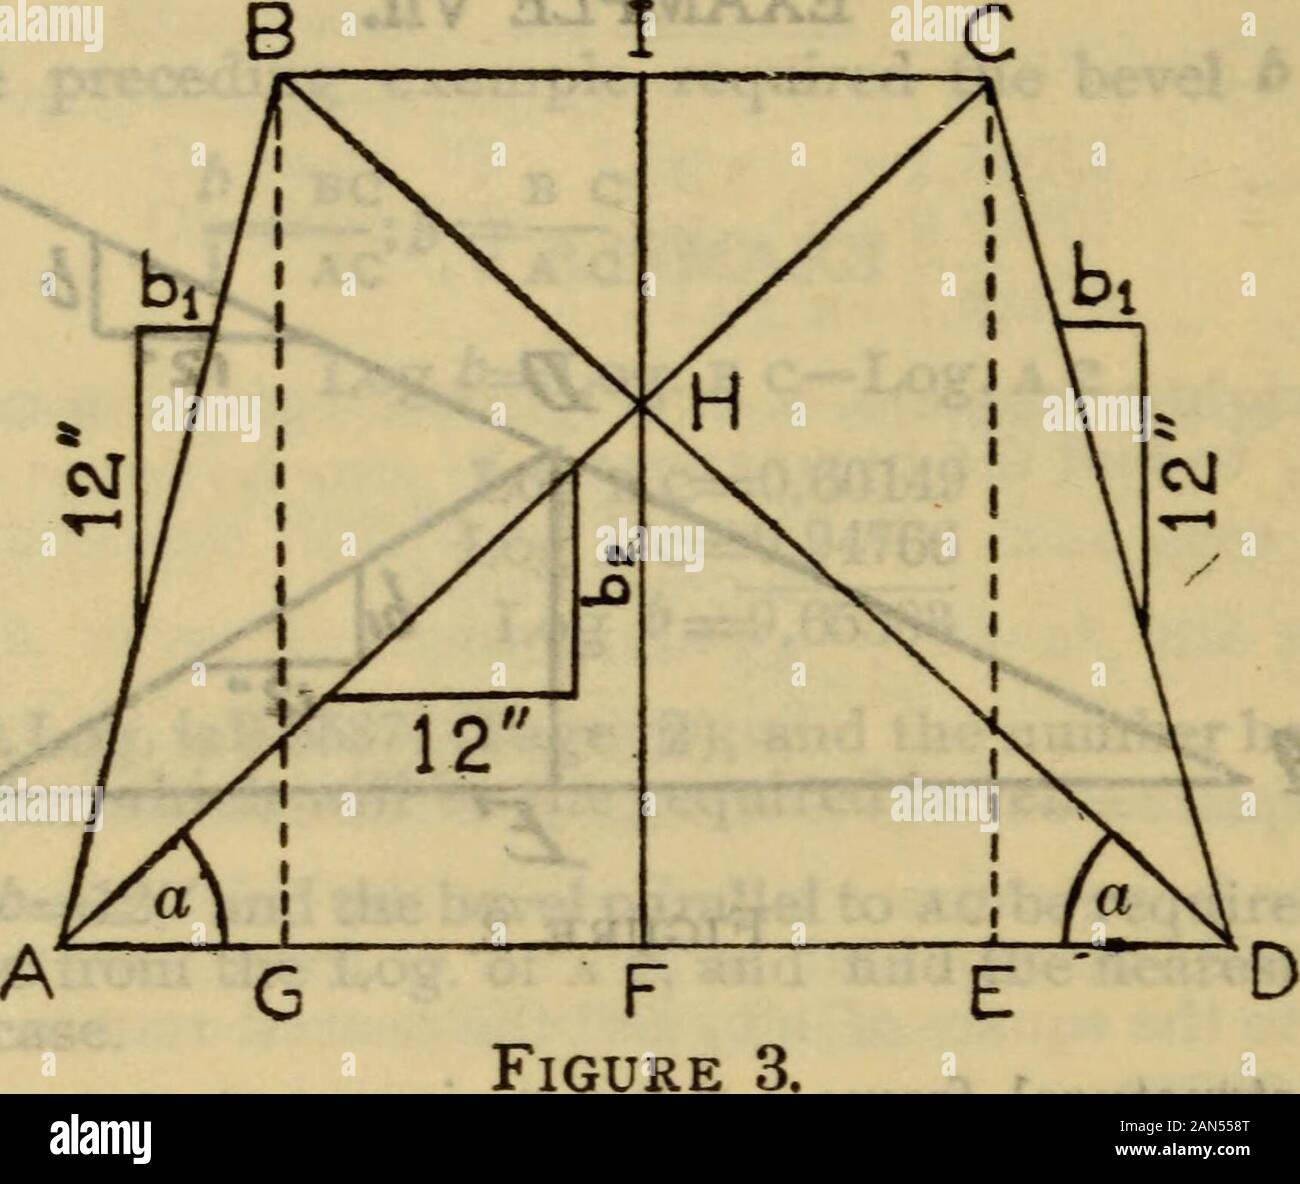 Smoley's tables; parallel tables of logarithms and squares, diagram for solving right triangles, angles and logaithmic functions, corresponding to given bevels, common logarithms of numbers, tables of logarithmic and natural trigonometric functions, and other tables; for engineers, architects and students . rectly. In the numerical examples V and VI: Log AB=0.98784 I,og AC=0.94766 Log Sec A=0.04018 The nearest number=l^l%2^^ ^2=0.203014-/)2=1.2030 and the nearest root=l^l%2^. ..rlao.^^T 323 EXAMPLE Vn. .^^ JD^ ^^ 12 Vs «5^ Figure 2. In the structural frame a D B c K given A E, E C and B c to f Stock Photo